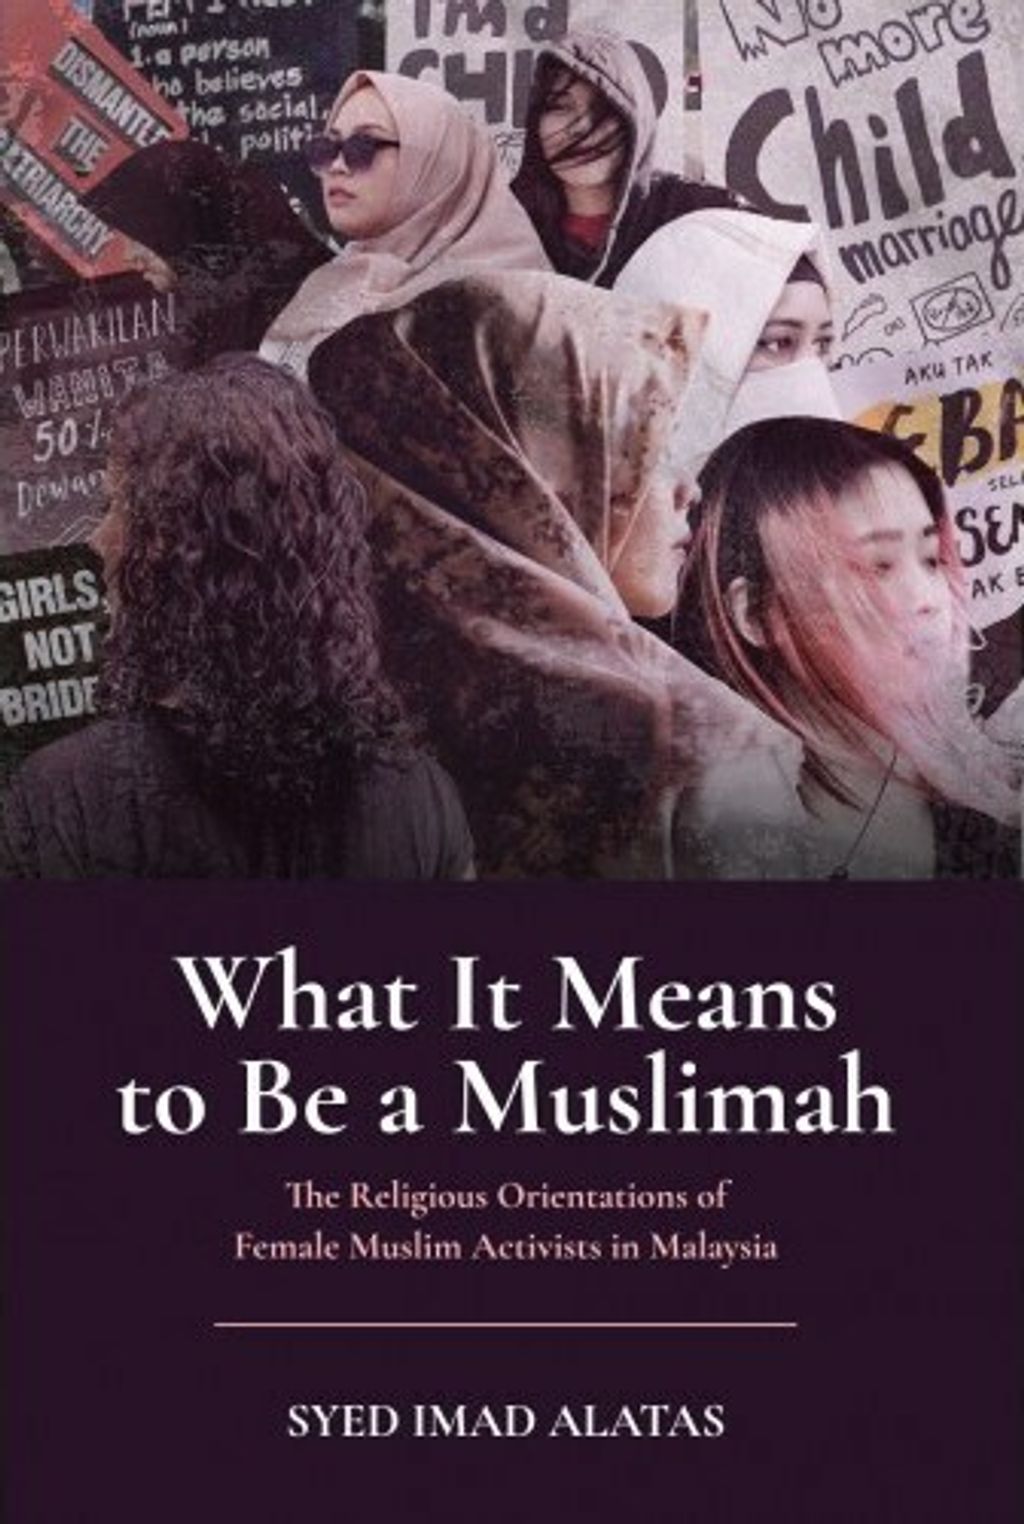 WHAT IT MEANS TO BE A MUSLIMAH